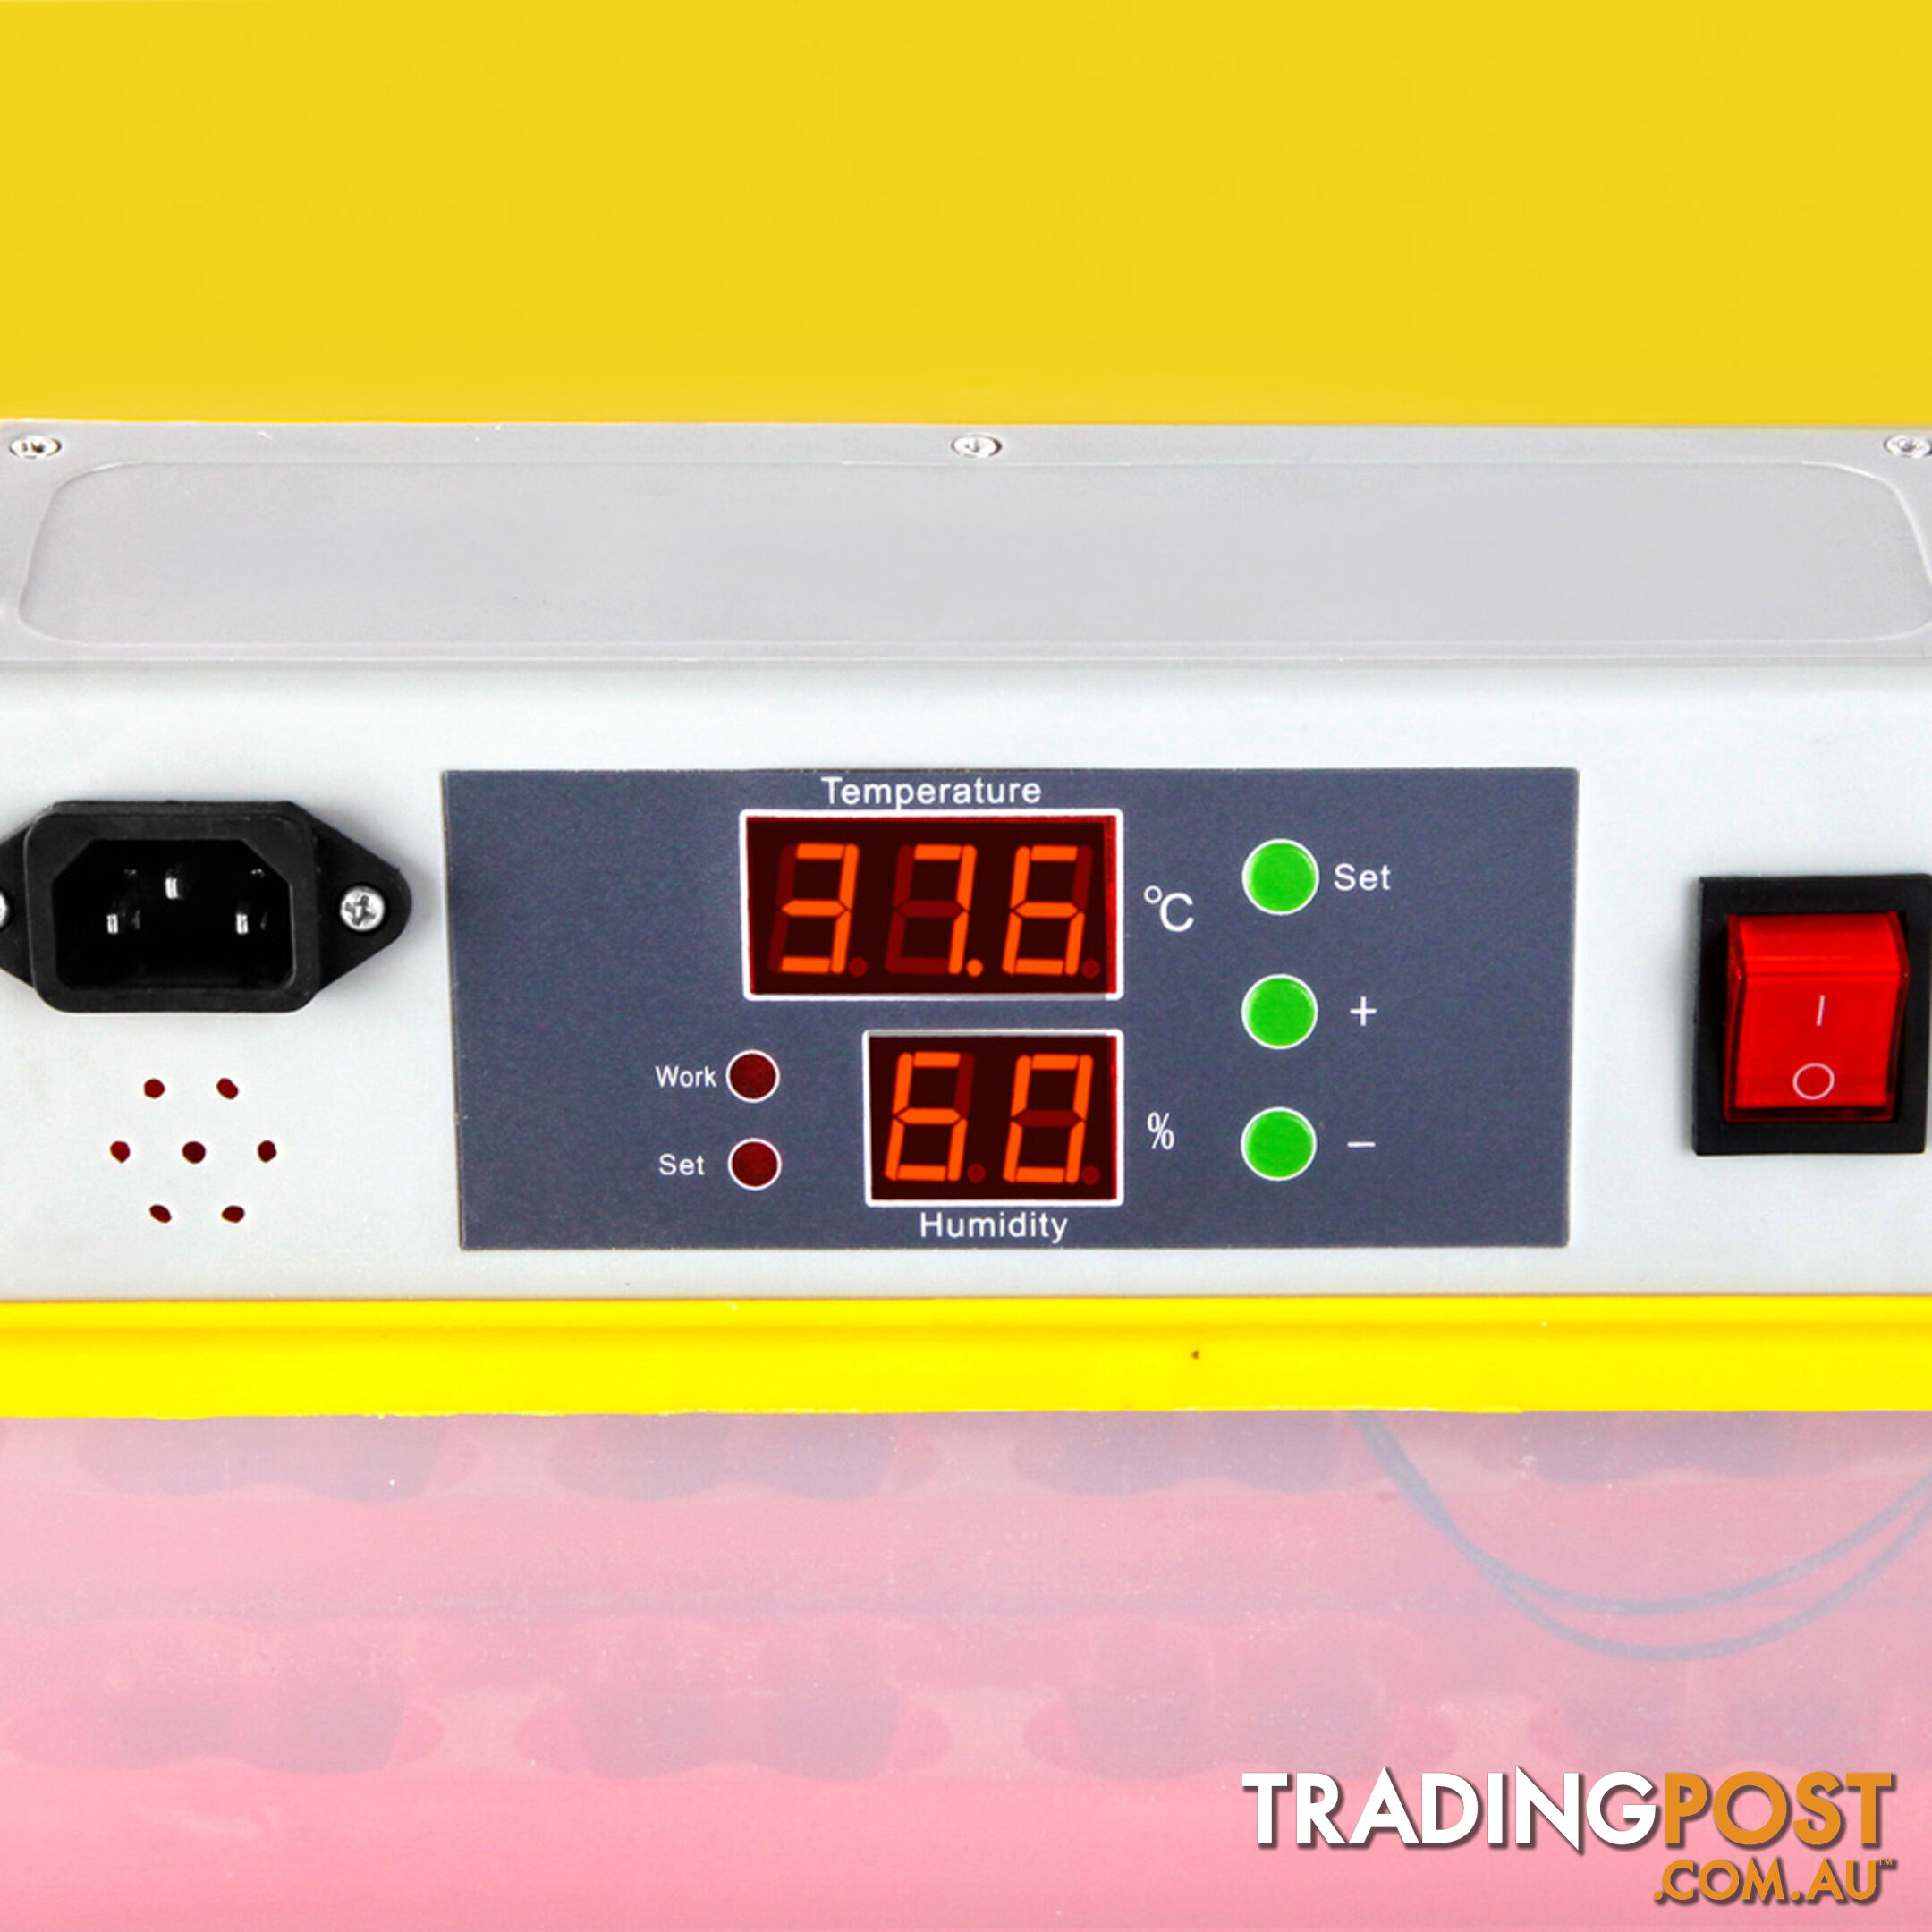 Automatic Digital LED 24 Egg Incubator Turning Chicken Duck Quail Poultry